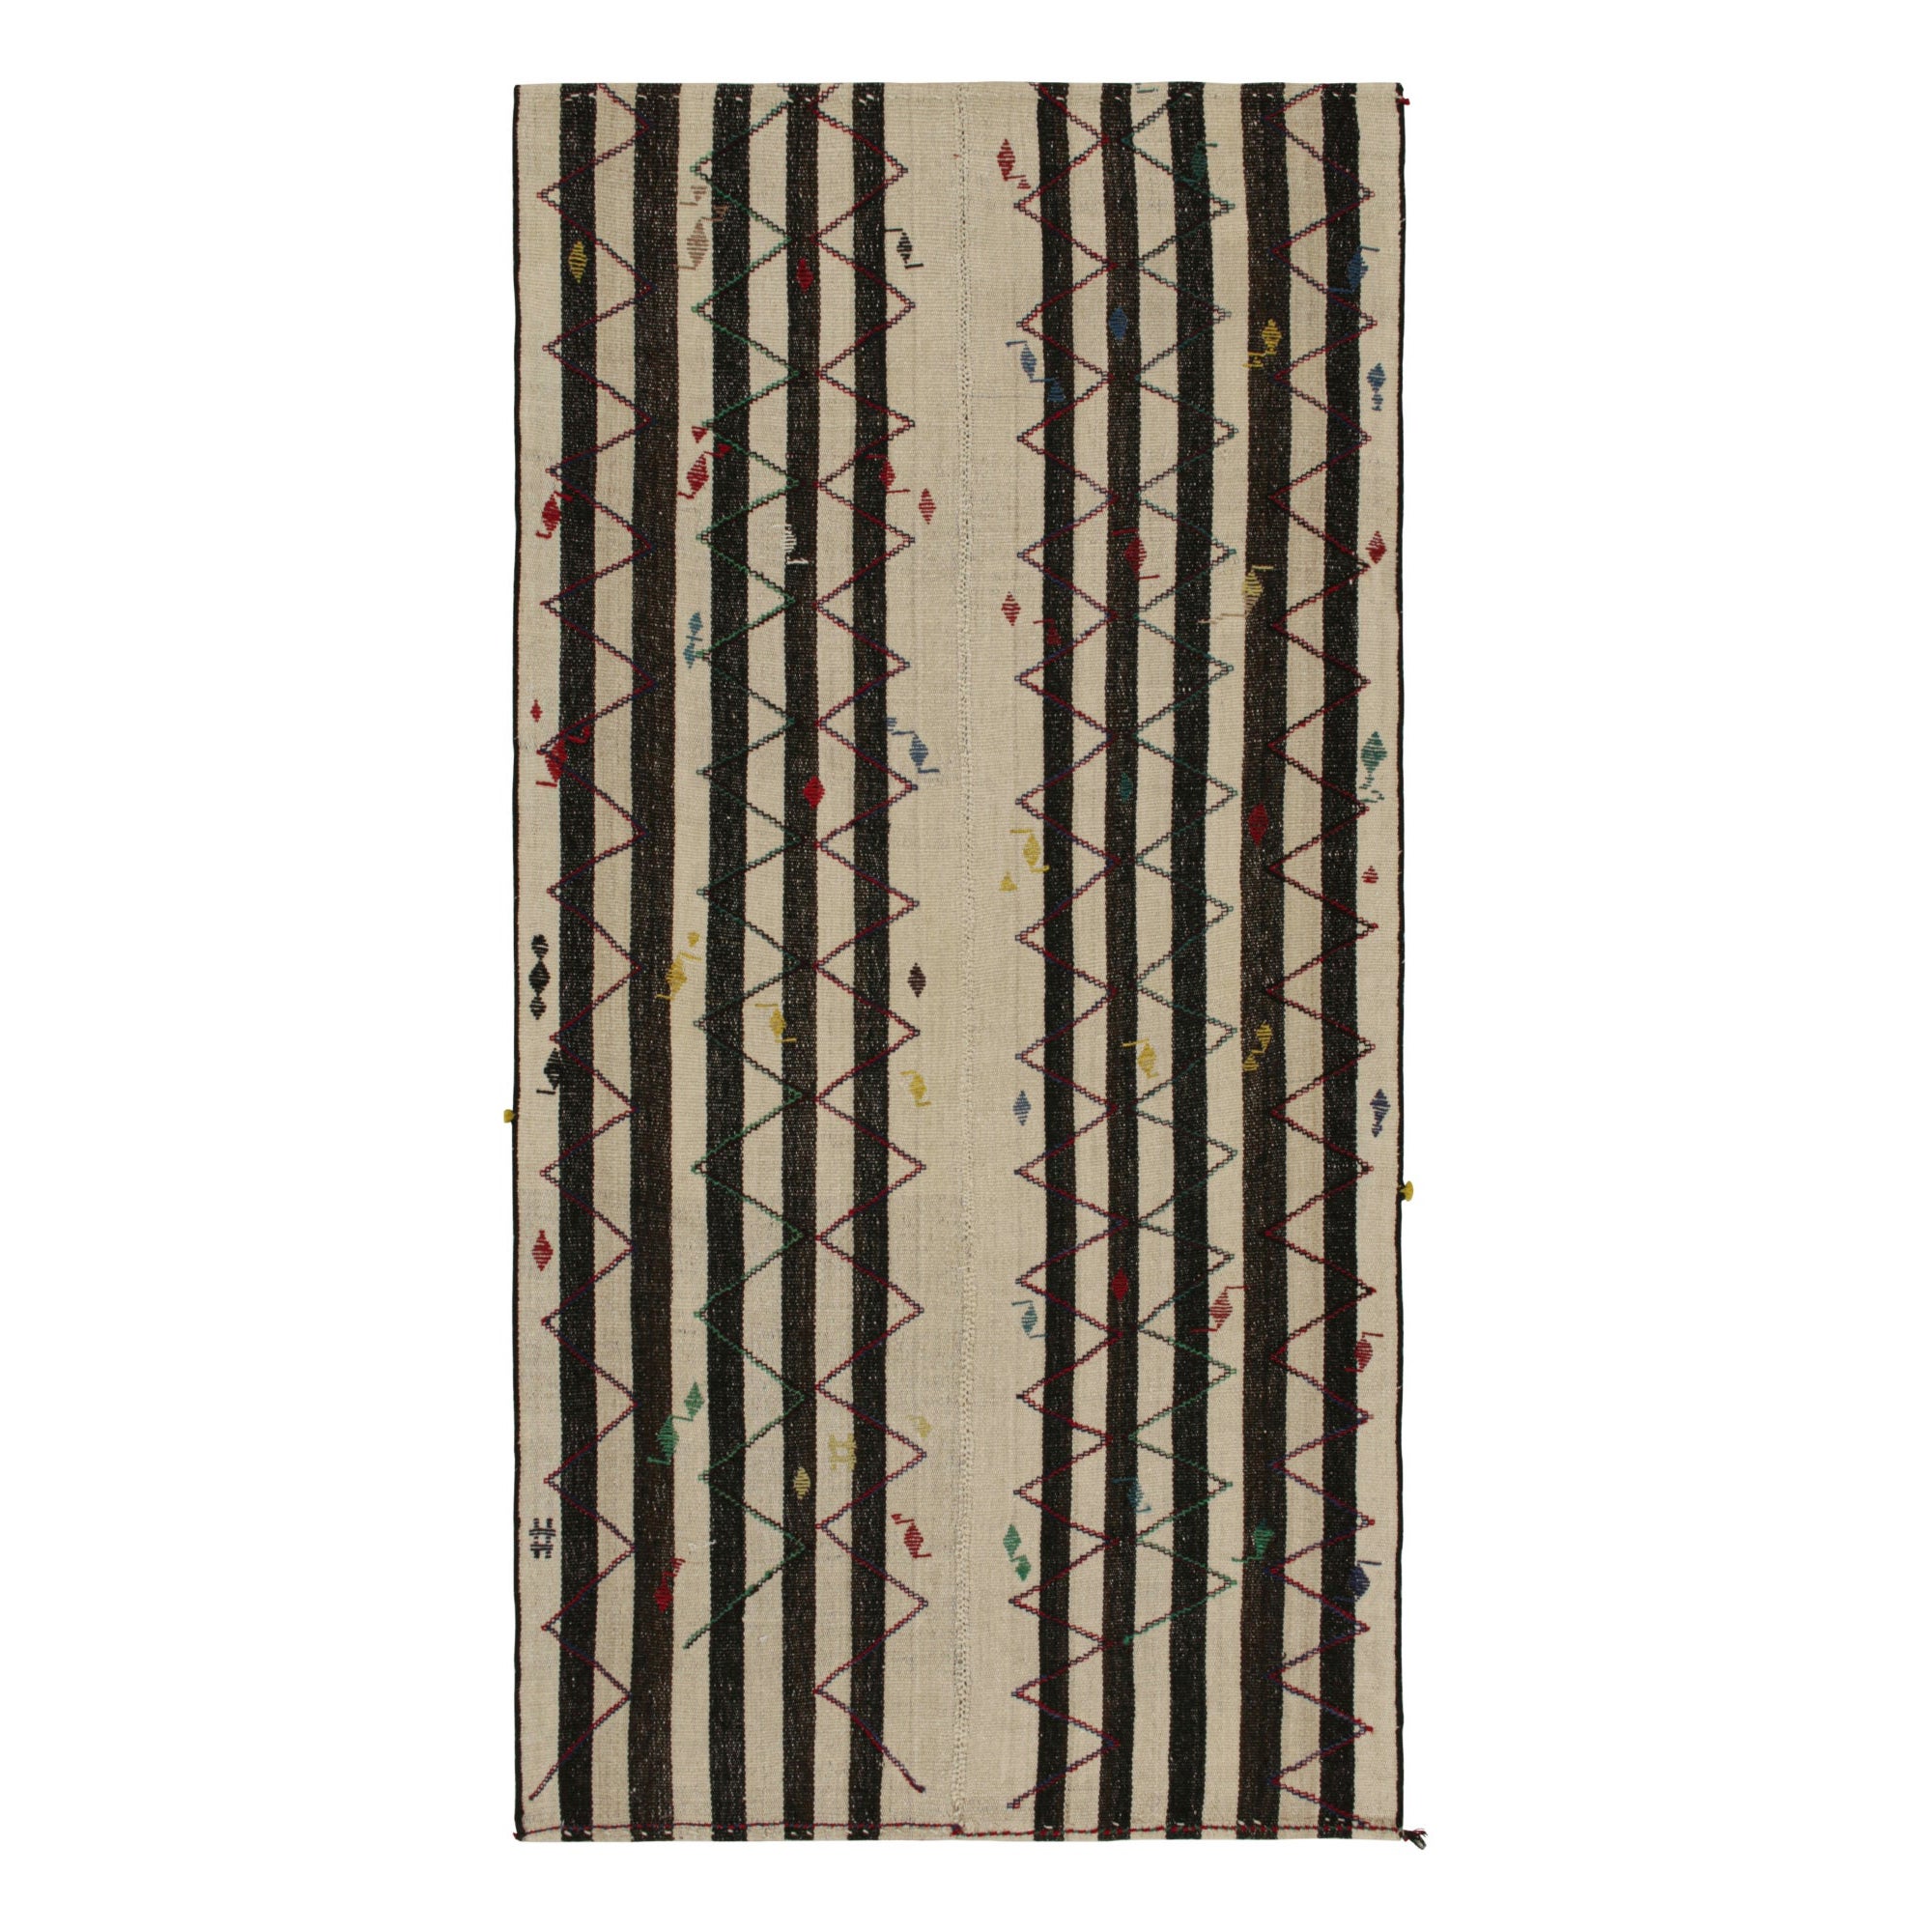 Vintage Persian Kilim in Beige with Black Stripes, Panel Style